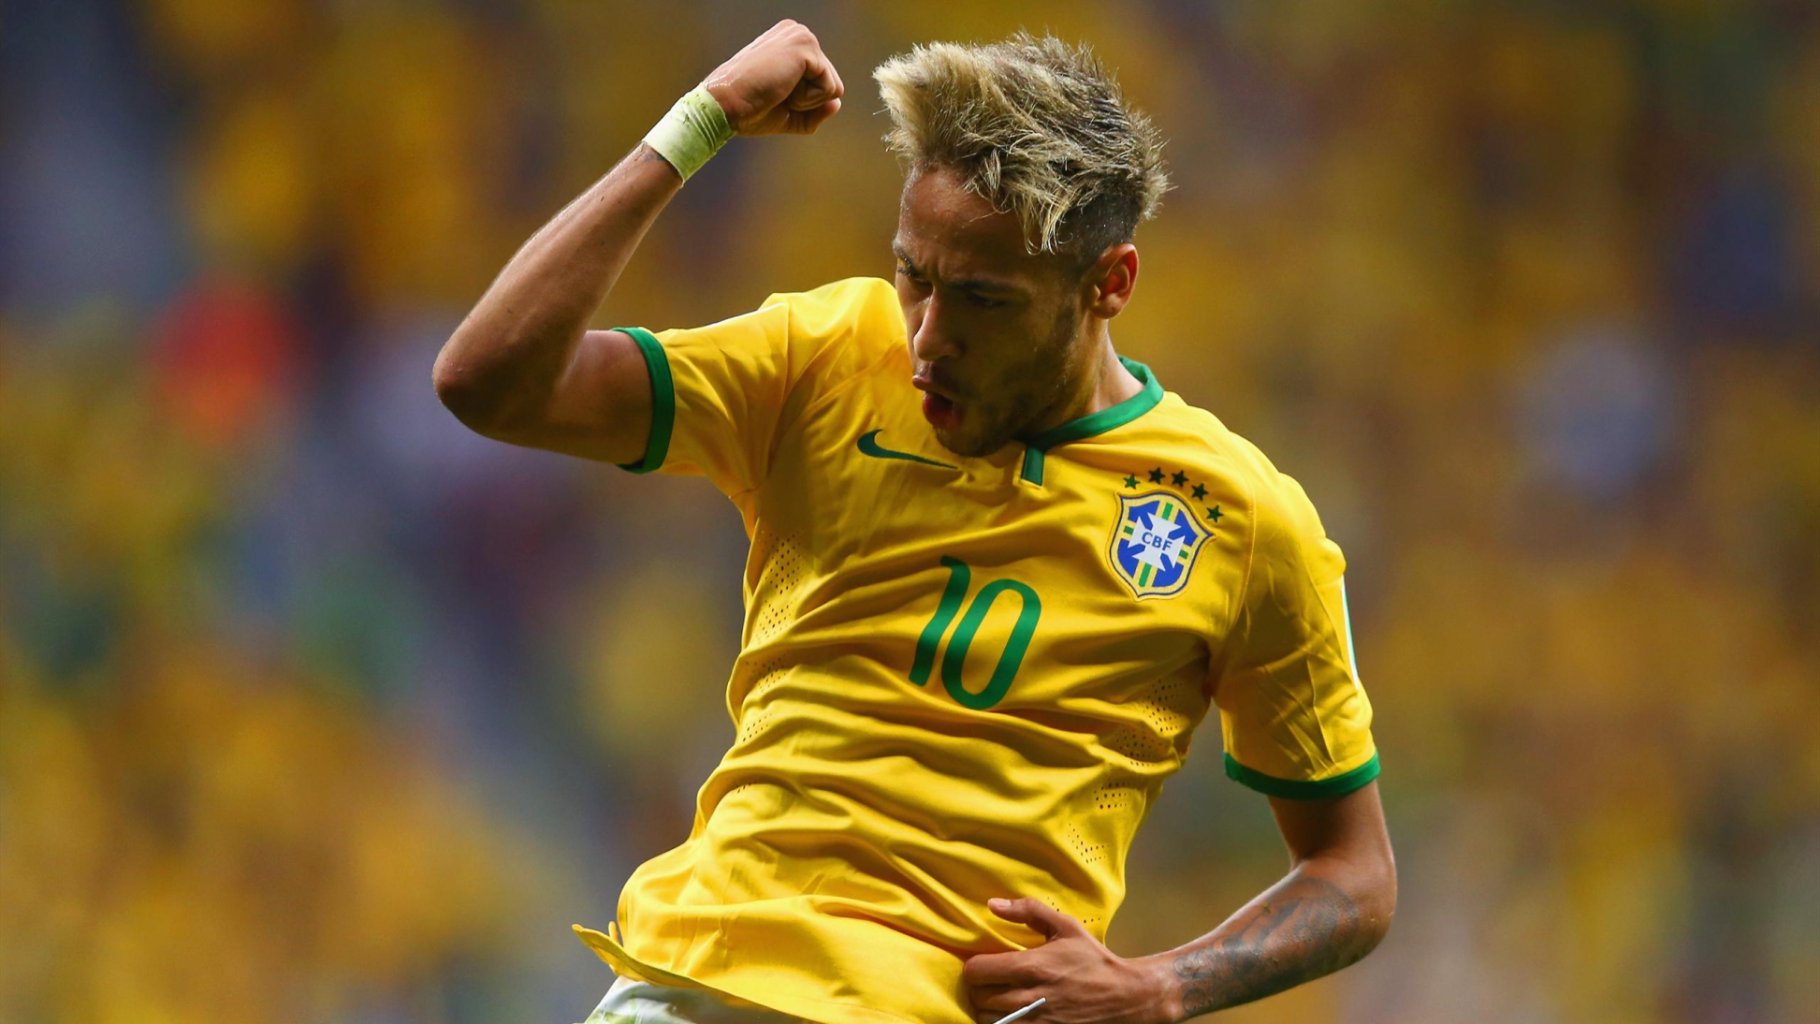 Neymar celebrating his goal in Brazil 4-1 Cameroon, in the FIFA World Cup 2014